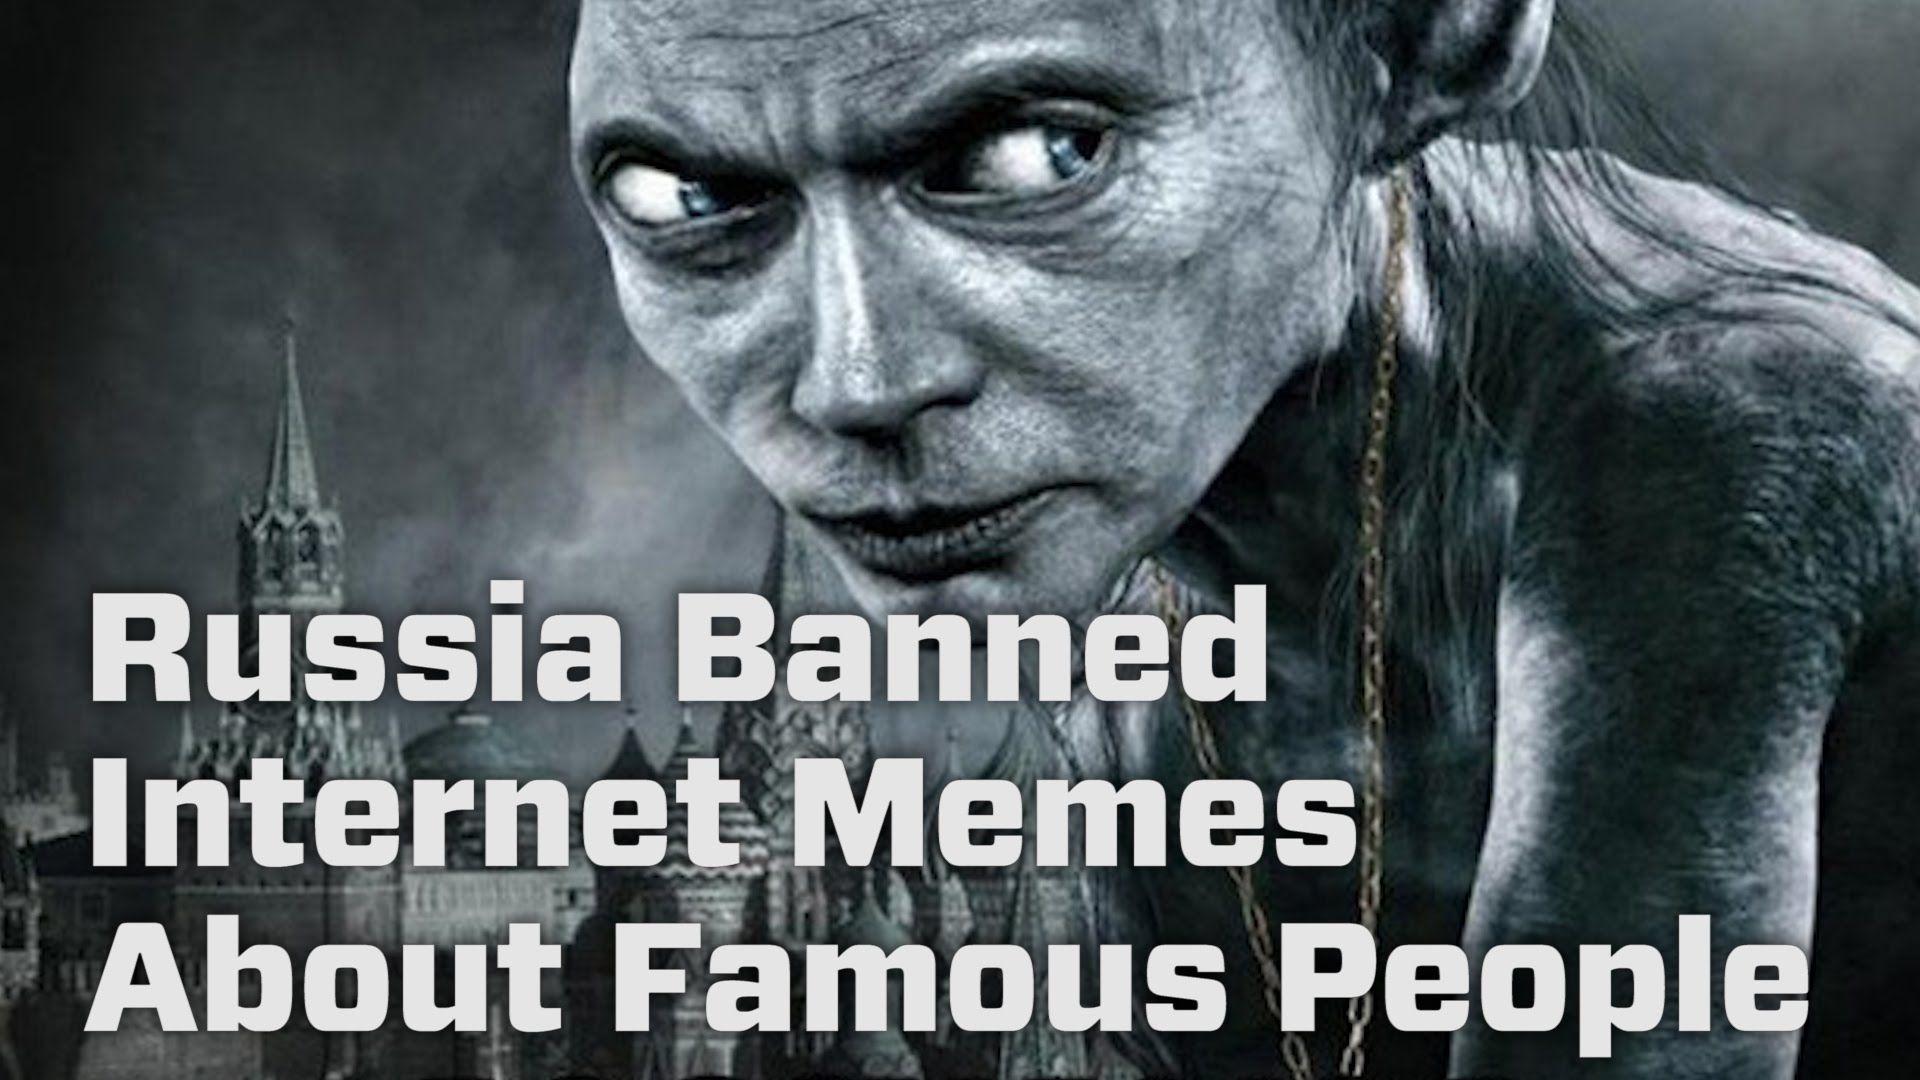 Russia banned twitter, Facebook meme. Quotes famous people about Russia. Russian ban